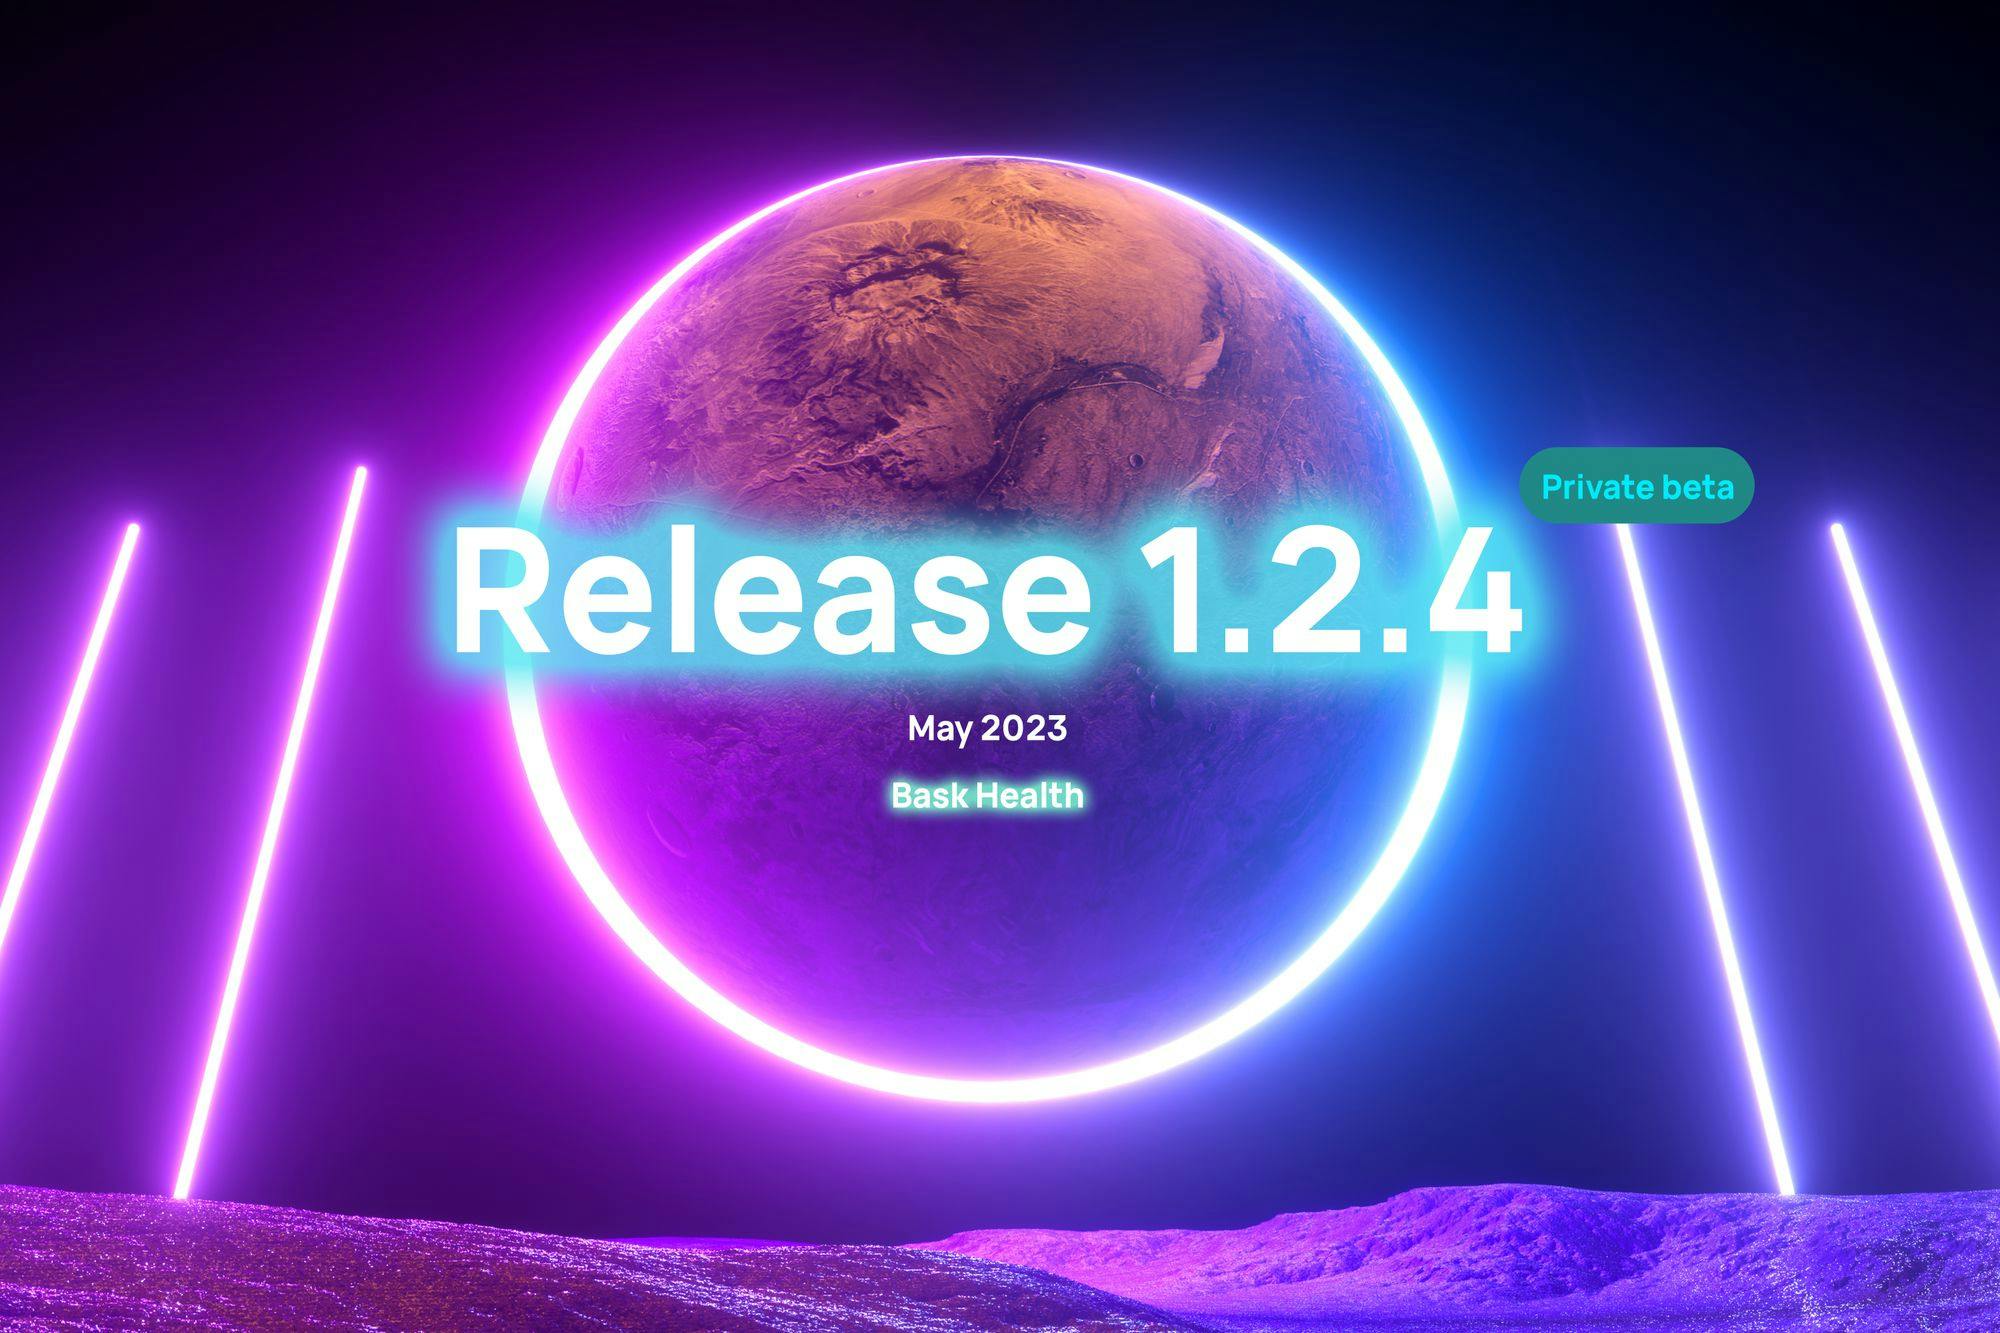 Release 1.2.4